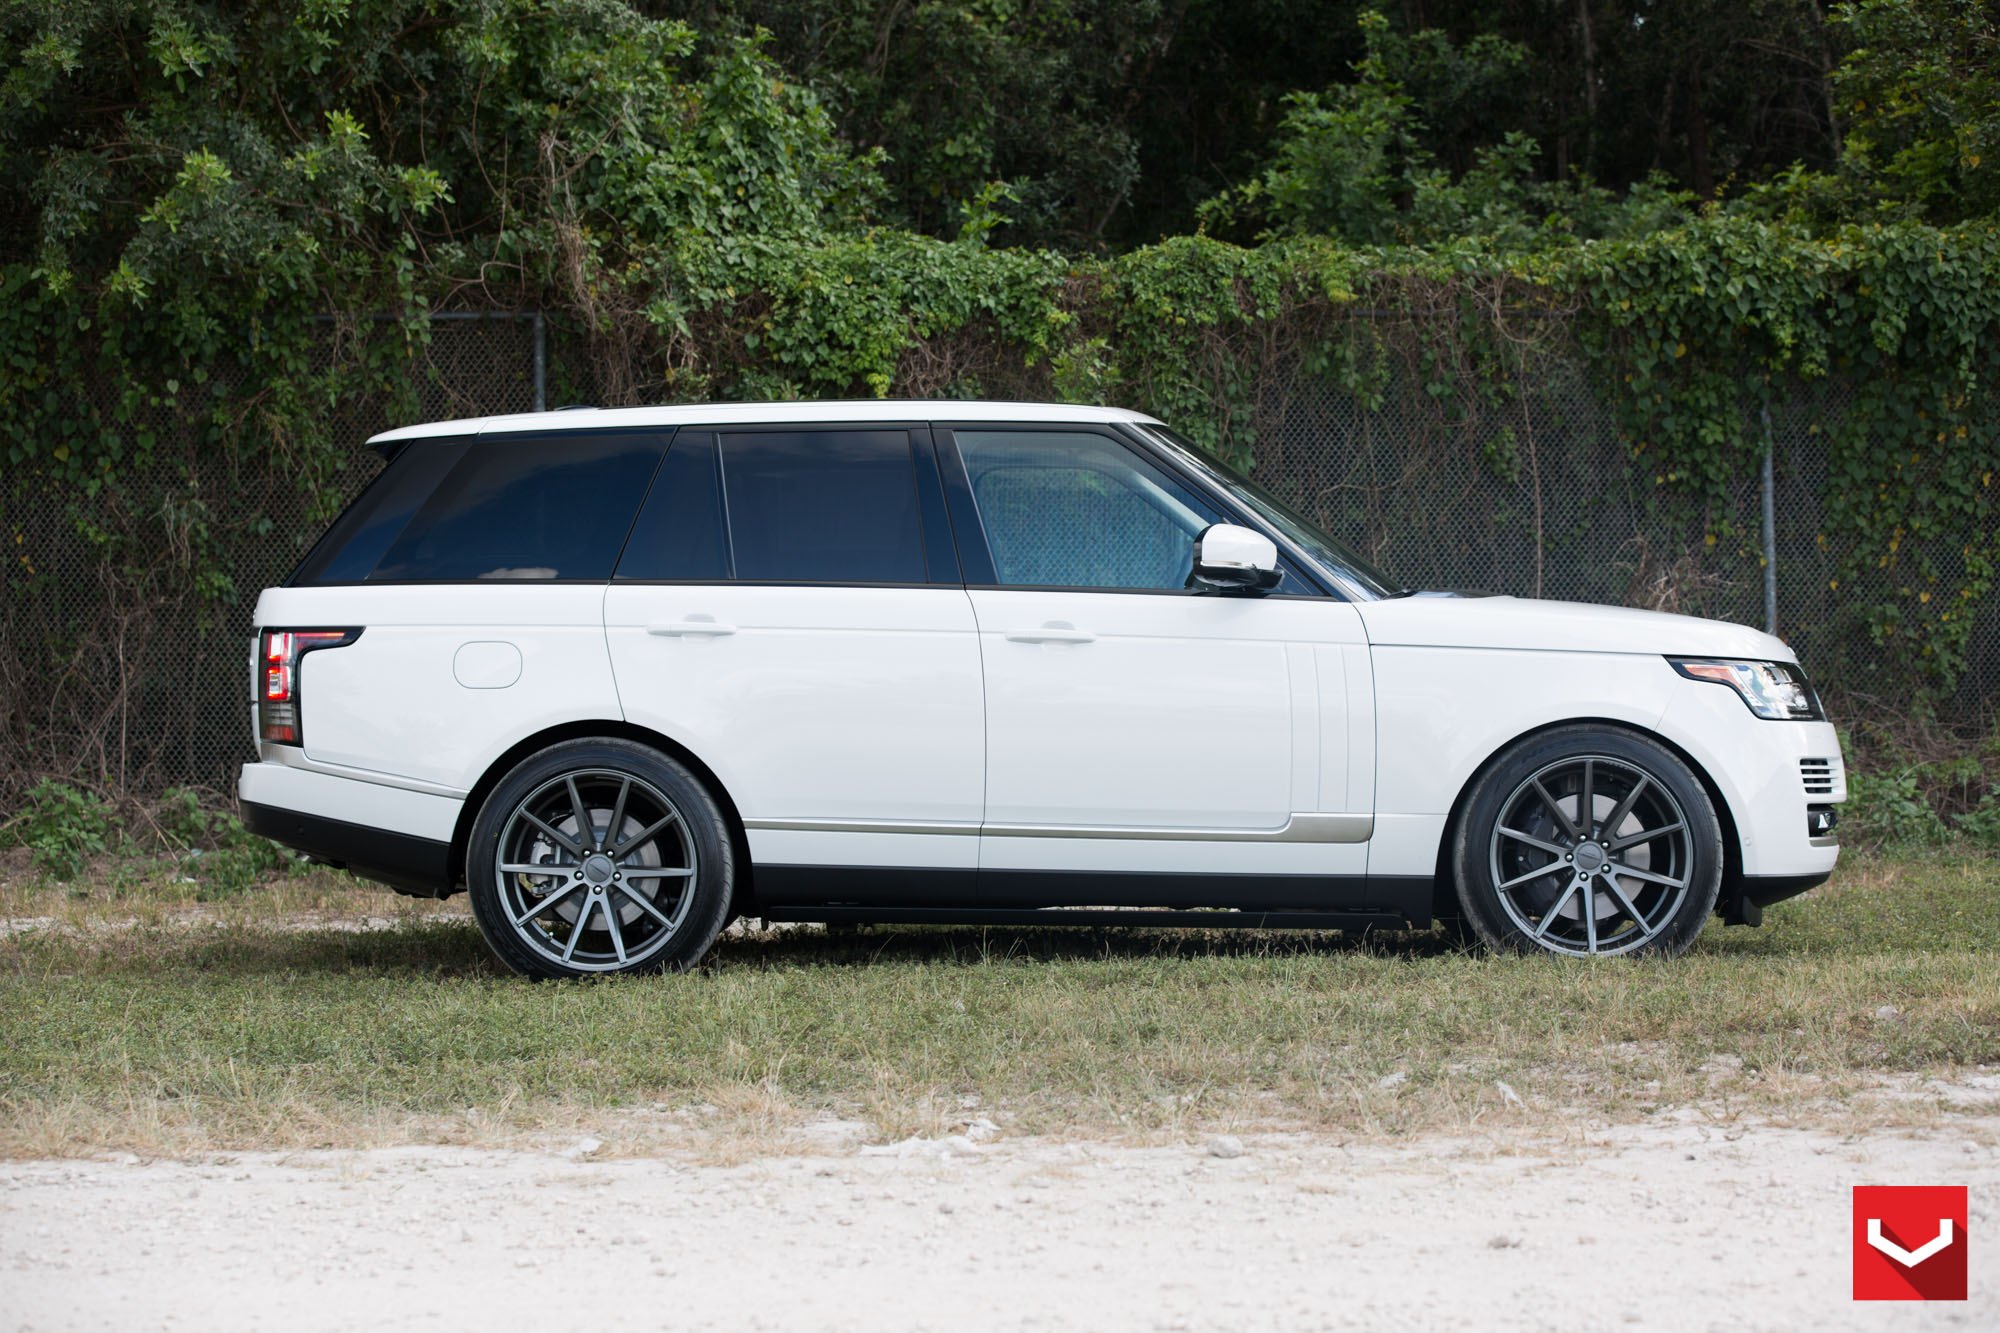 Aftermarket Side Steps on White Land Rover Range Rover - Photo by Vossen